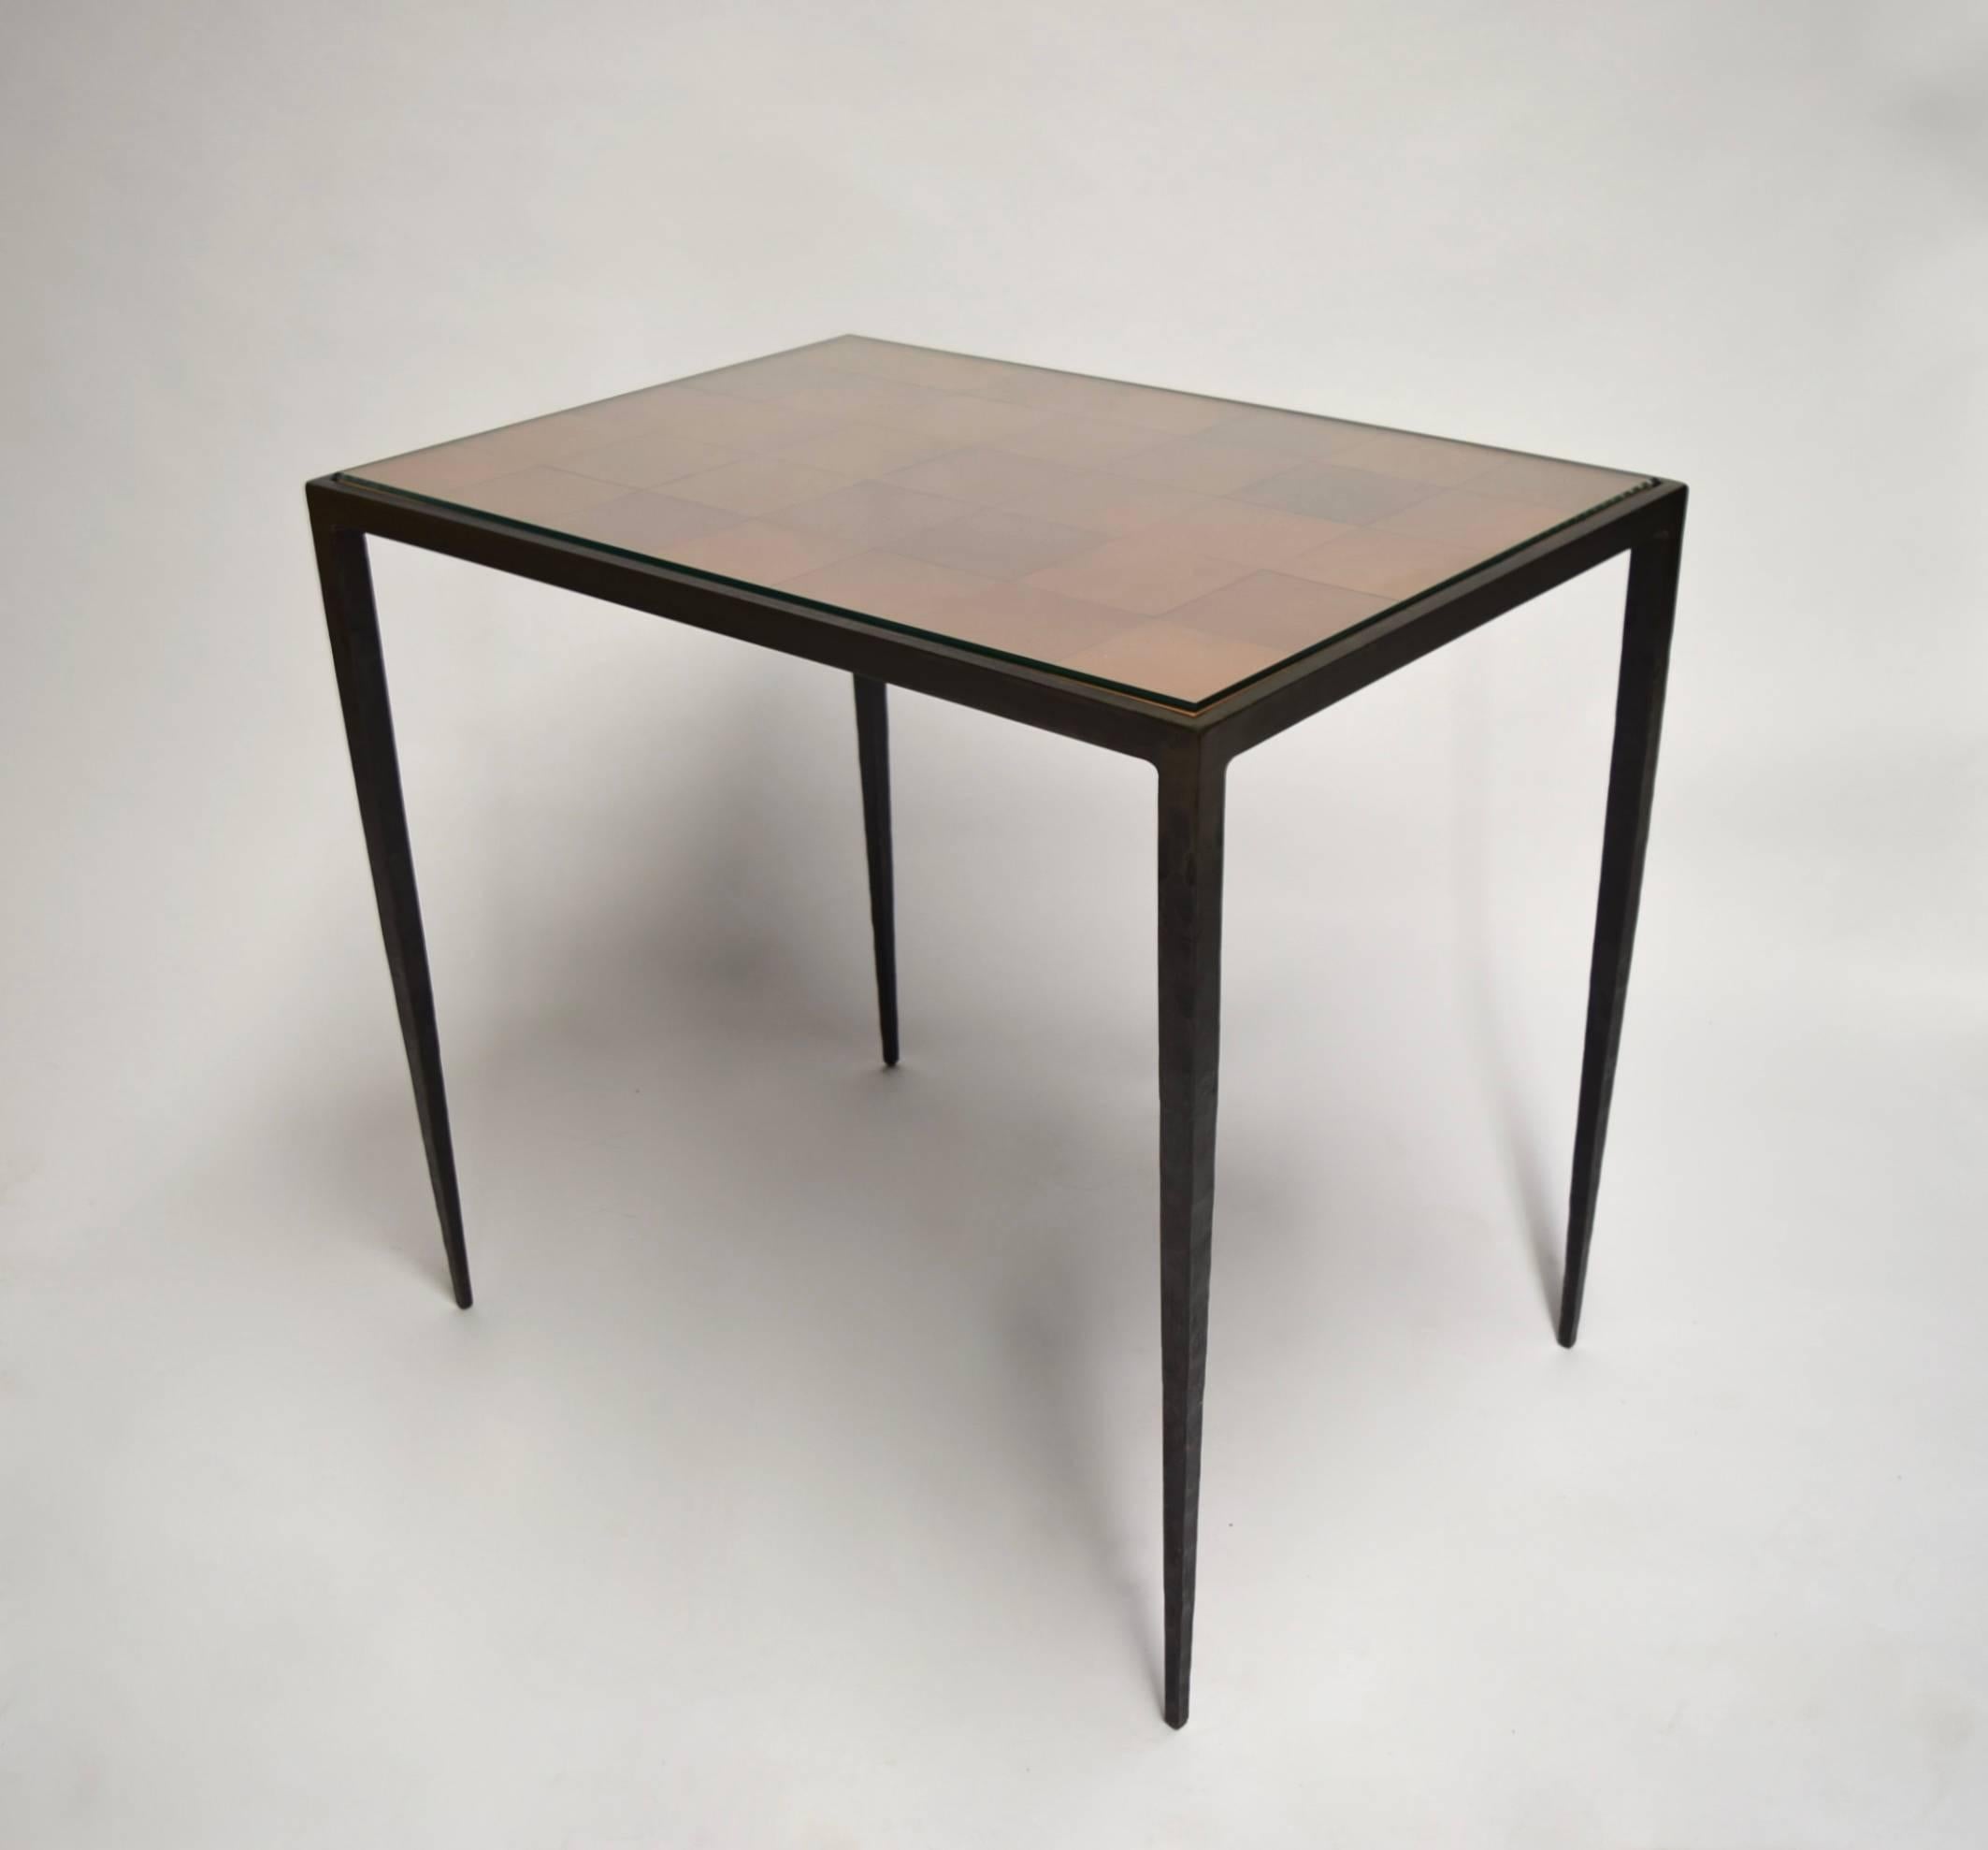 Occasional table in hammered, patinated bronze with tapering legs and an inset top comprising 35 square leather pieces. The protective clear glass top is shown in images 2-4.